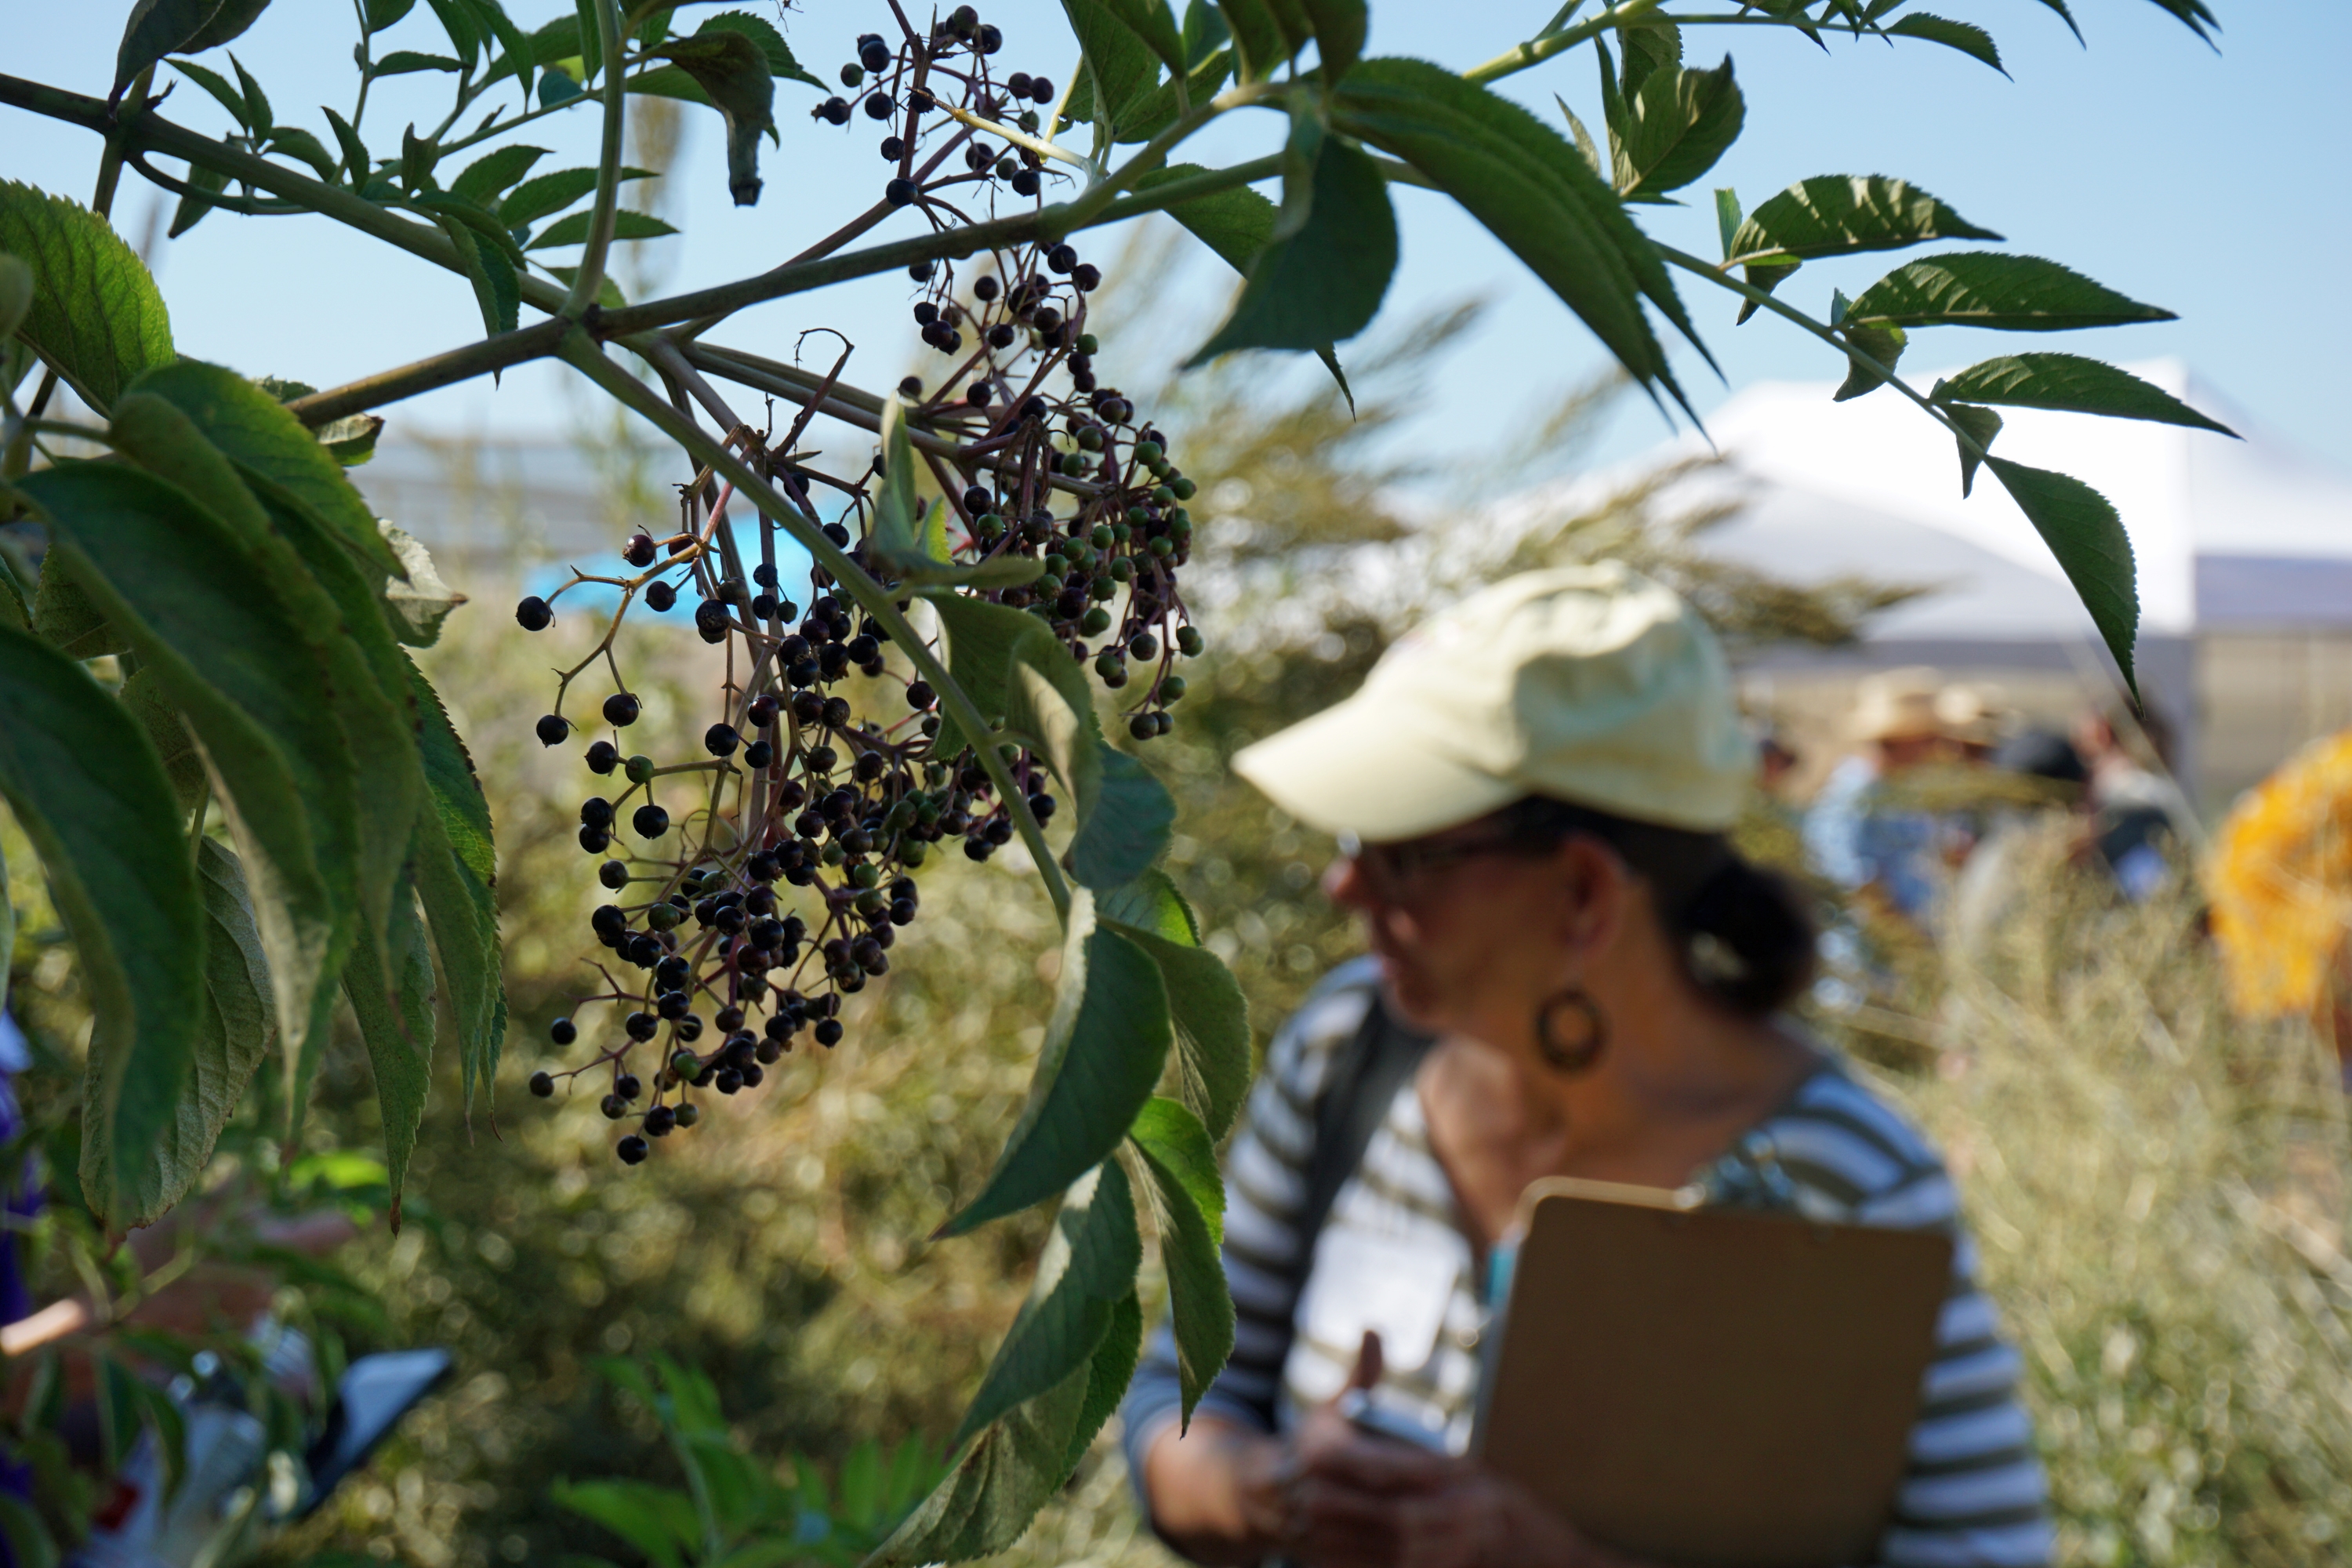 California elderberries have rich benefits for farms and diets ...